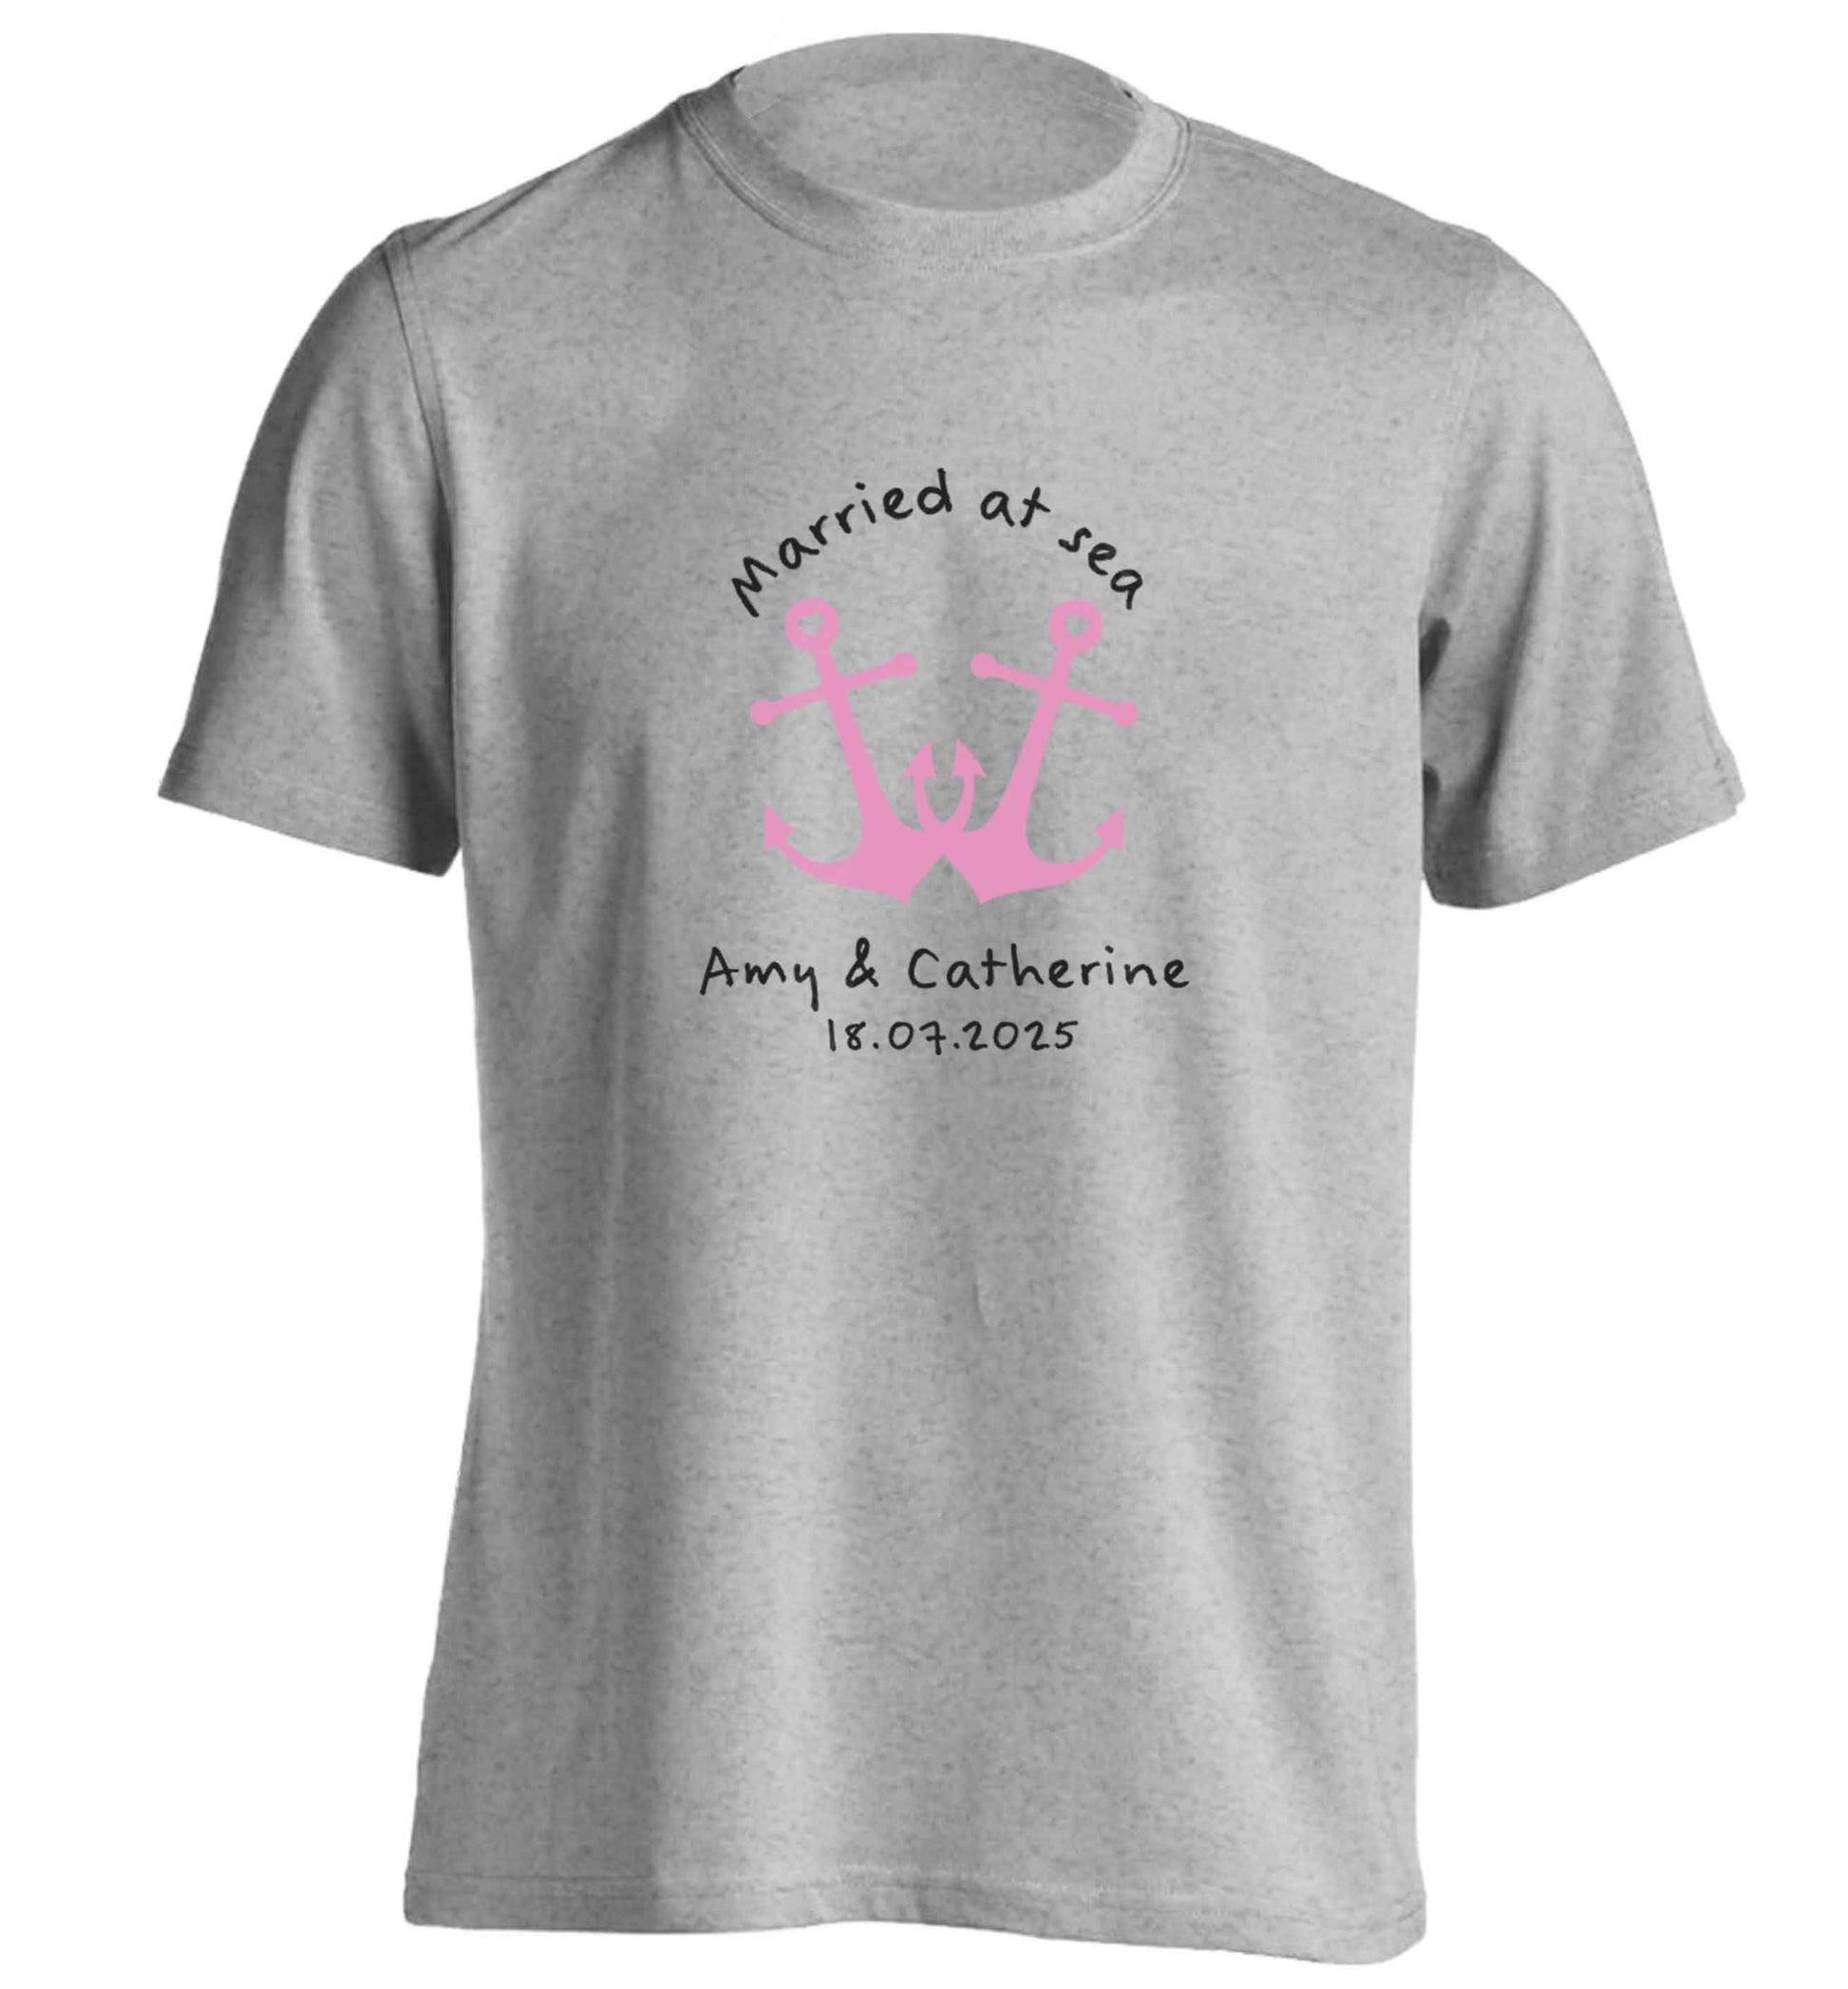 Married at sea pink anchors adults unisex grey Tshirt 2XL